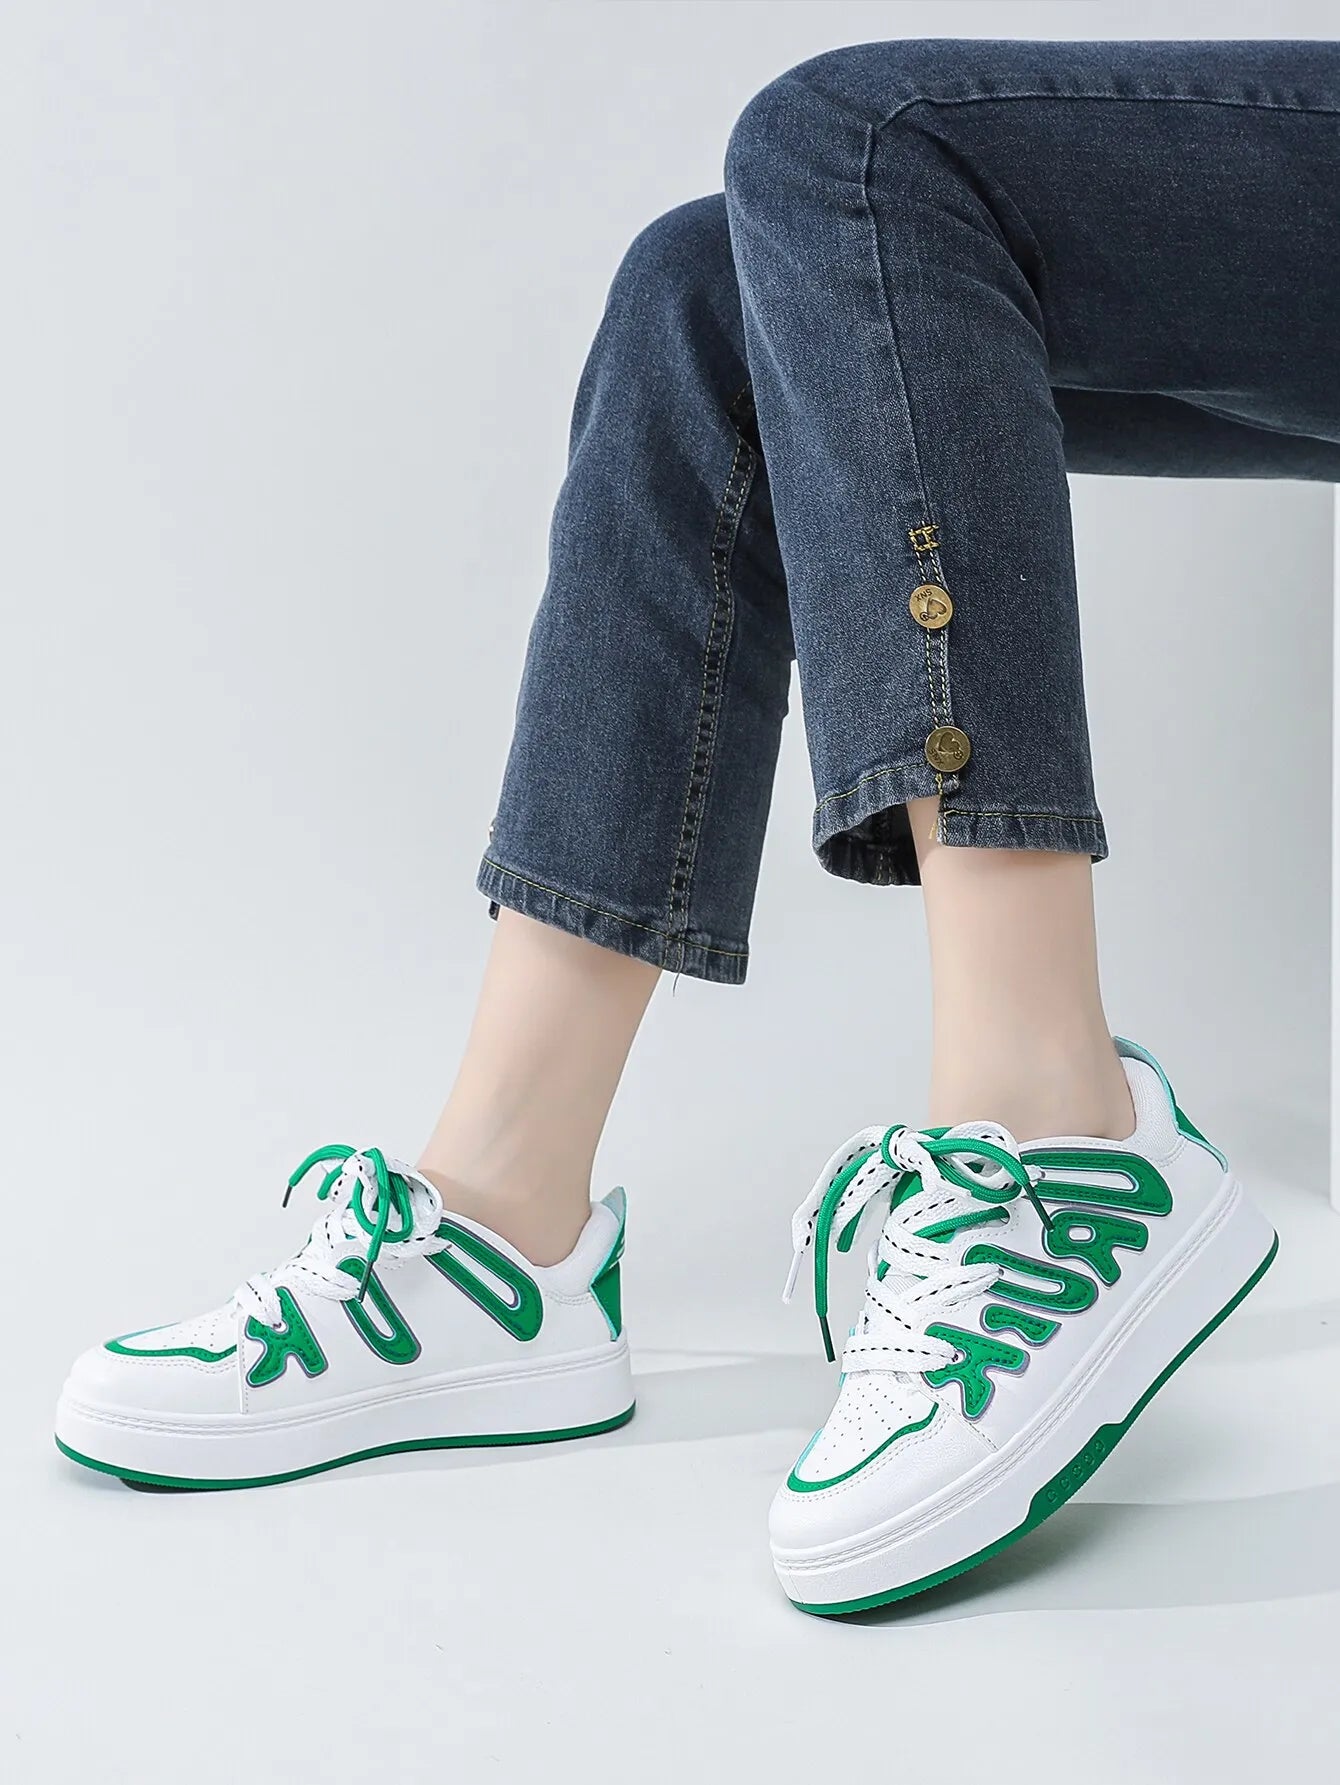 Women's Letter Patch Lace Up Casual Sneakers Shoes